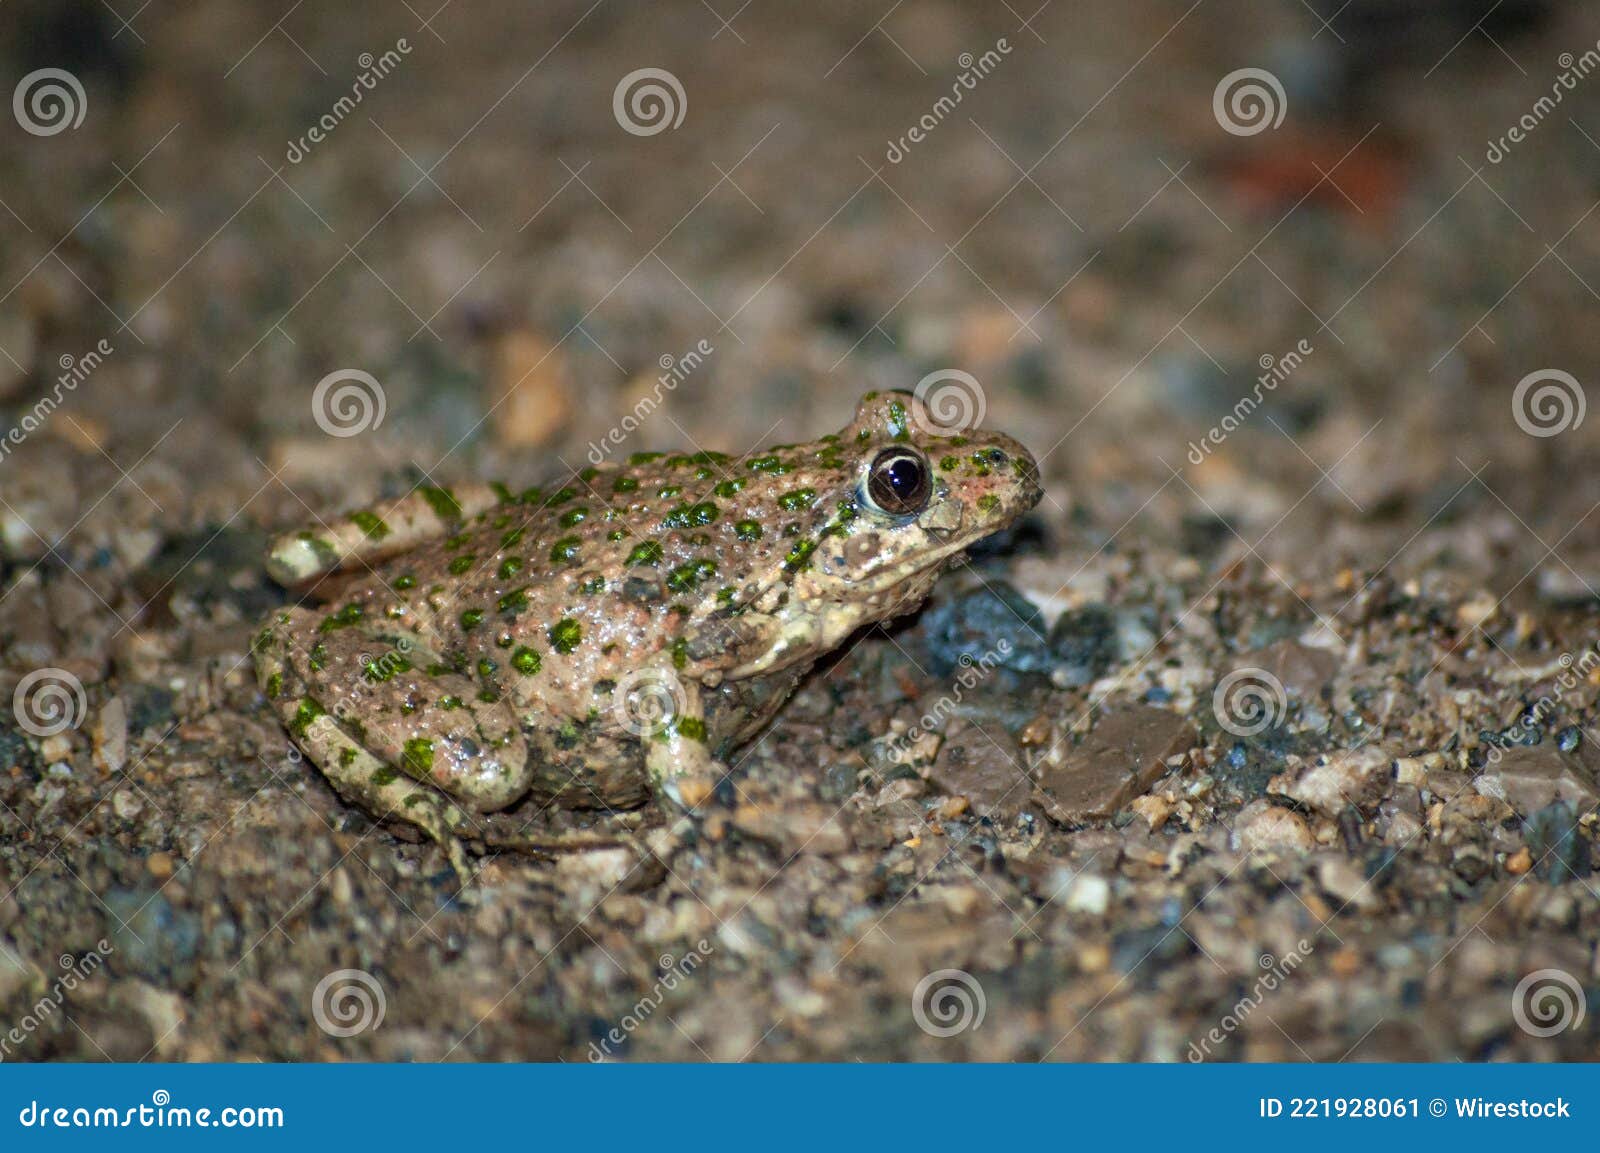 portrait of a common parsley frog in the ground